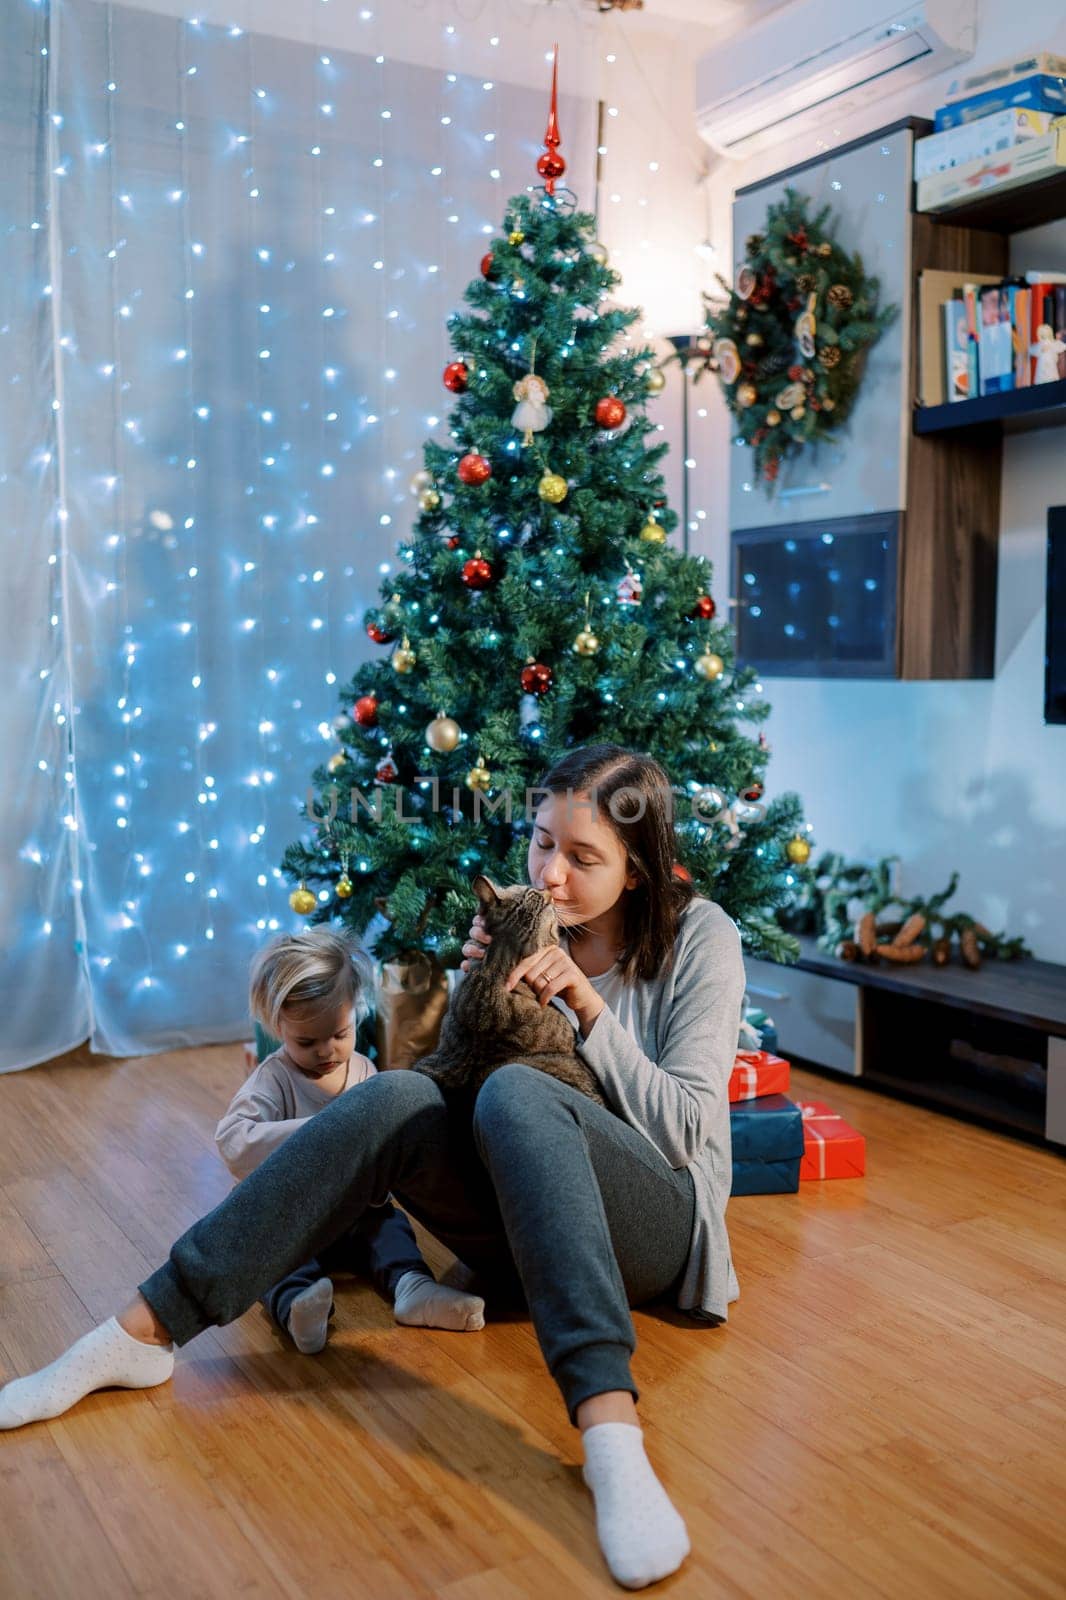 Mom pets a cat sitting on the floor with a little girl near the Christmas tree by Nadtochiy